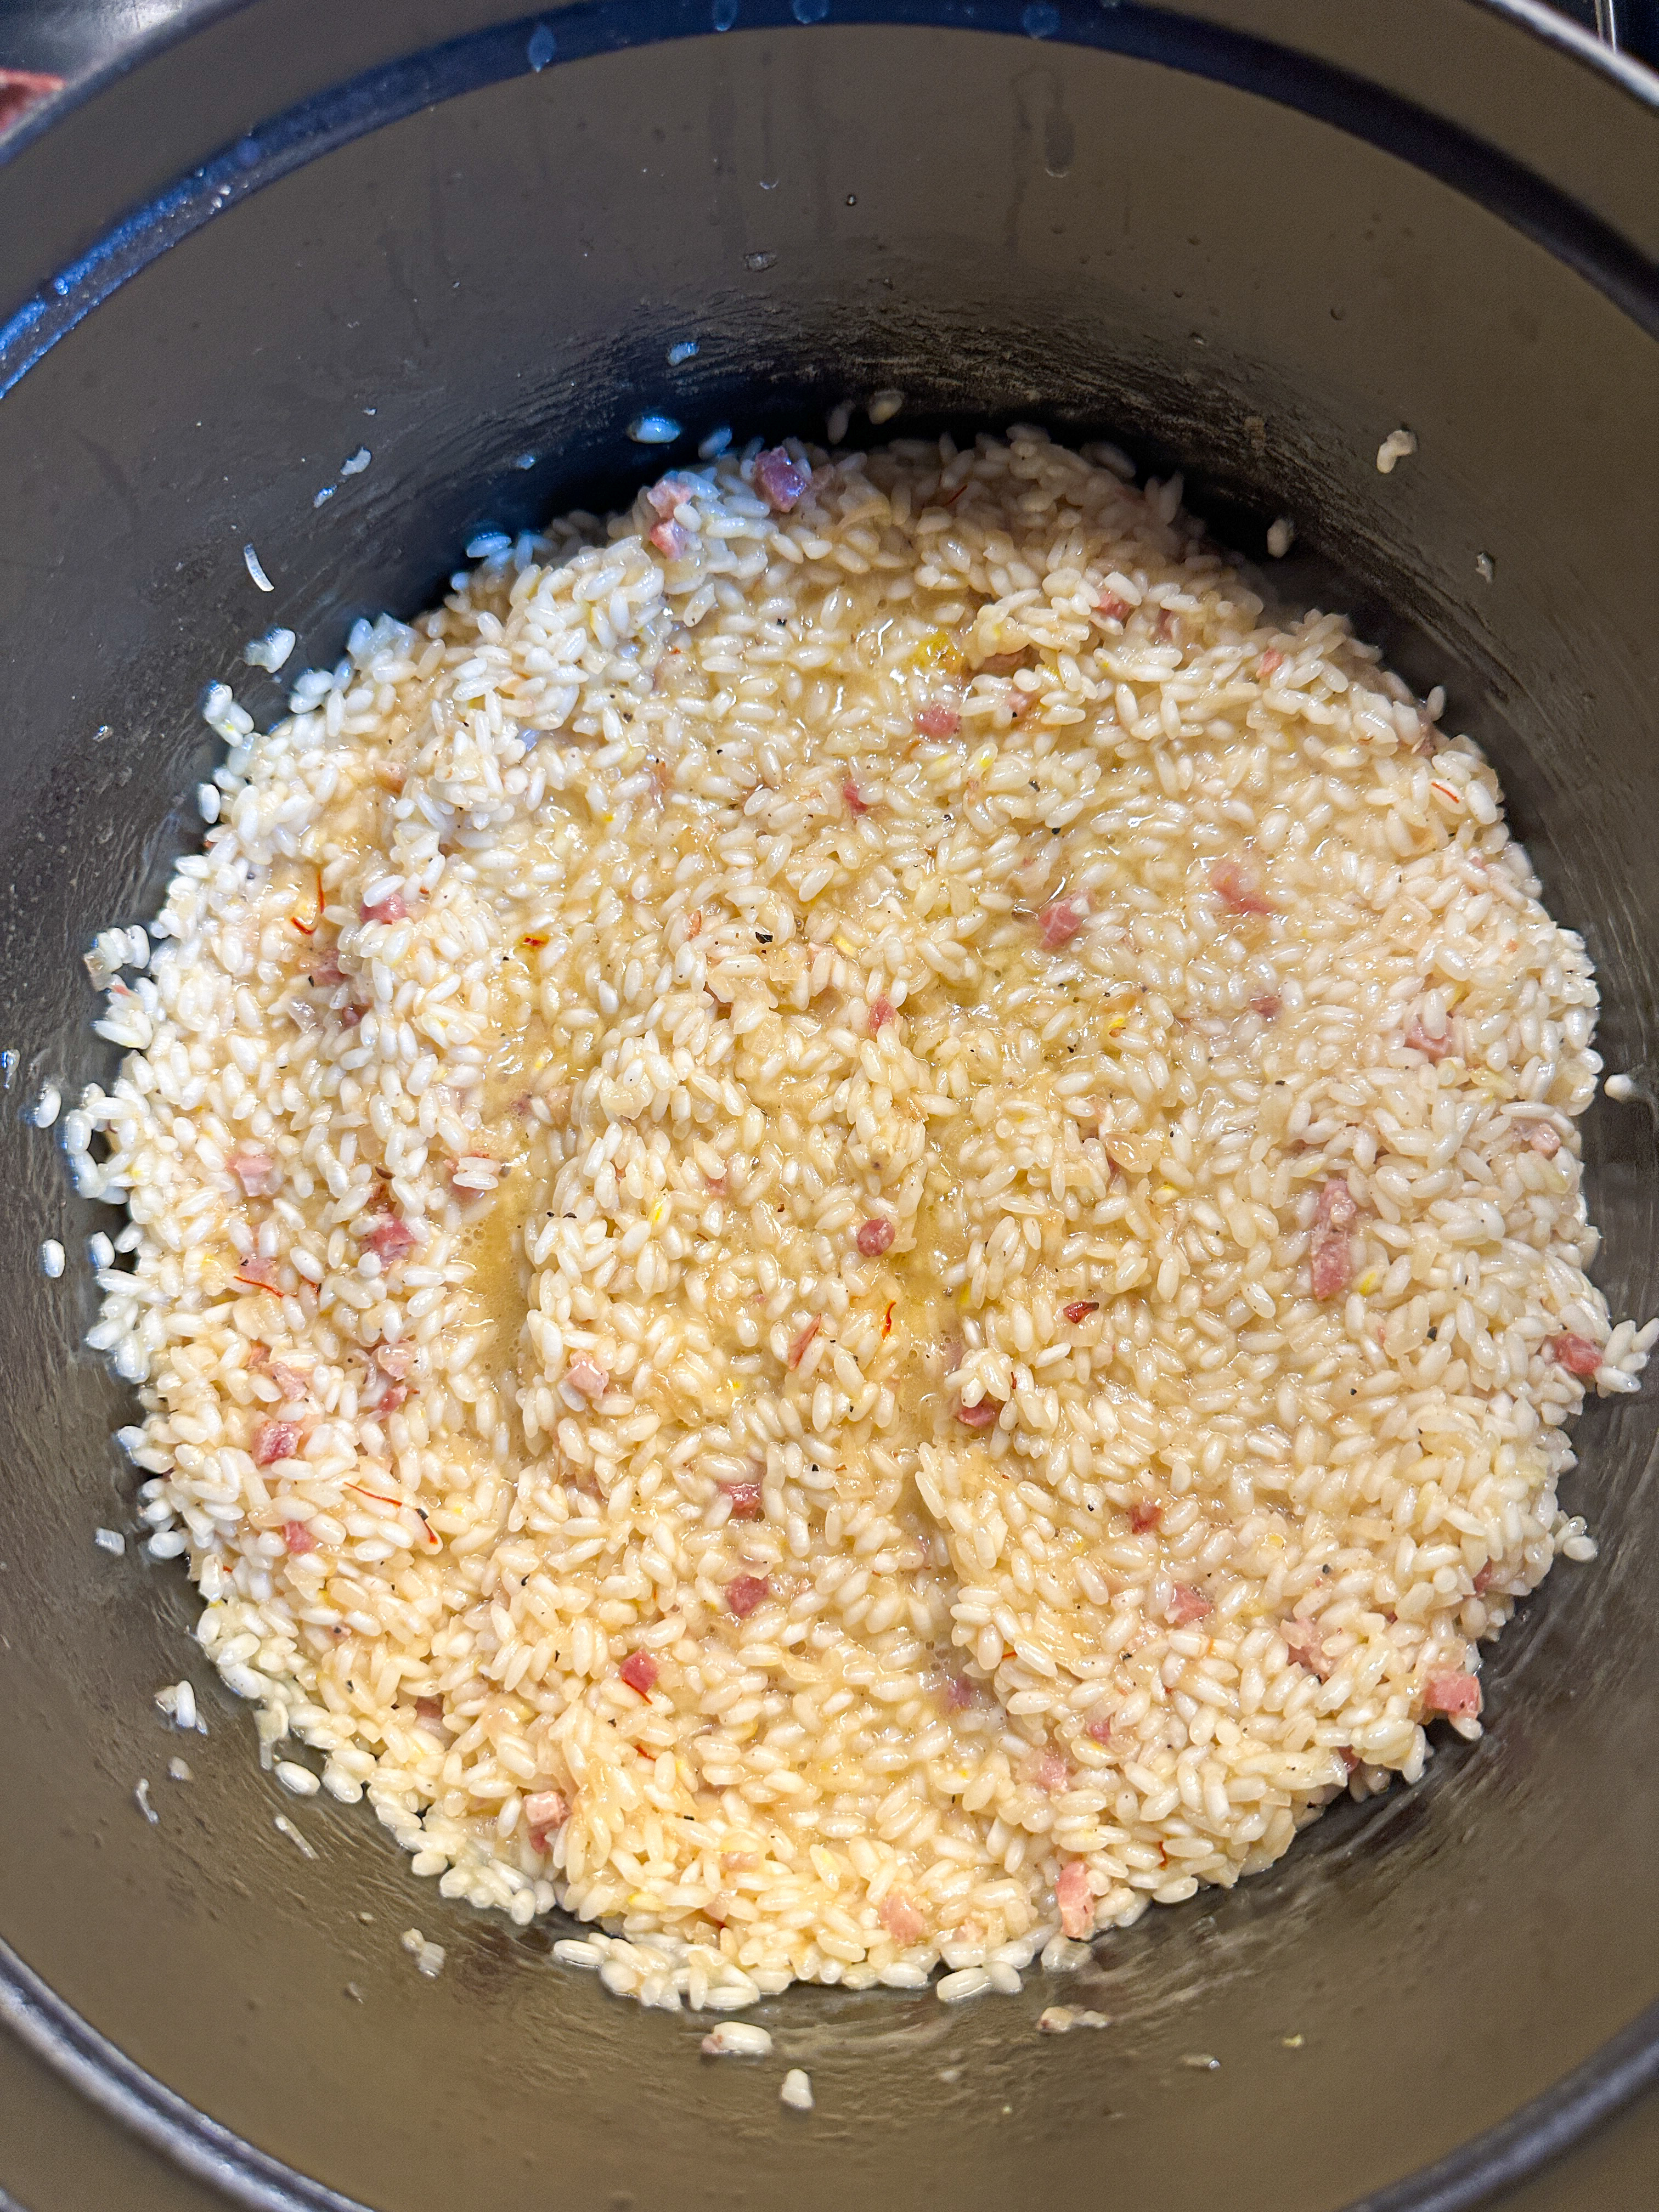 A nearly dry risotto mixture